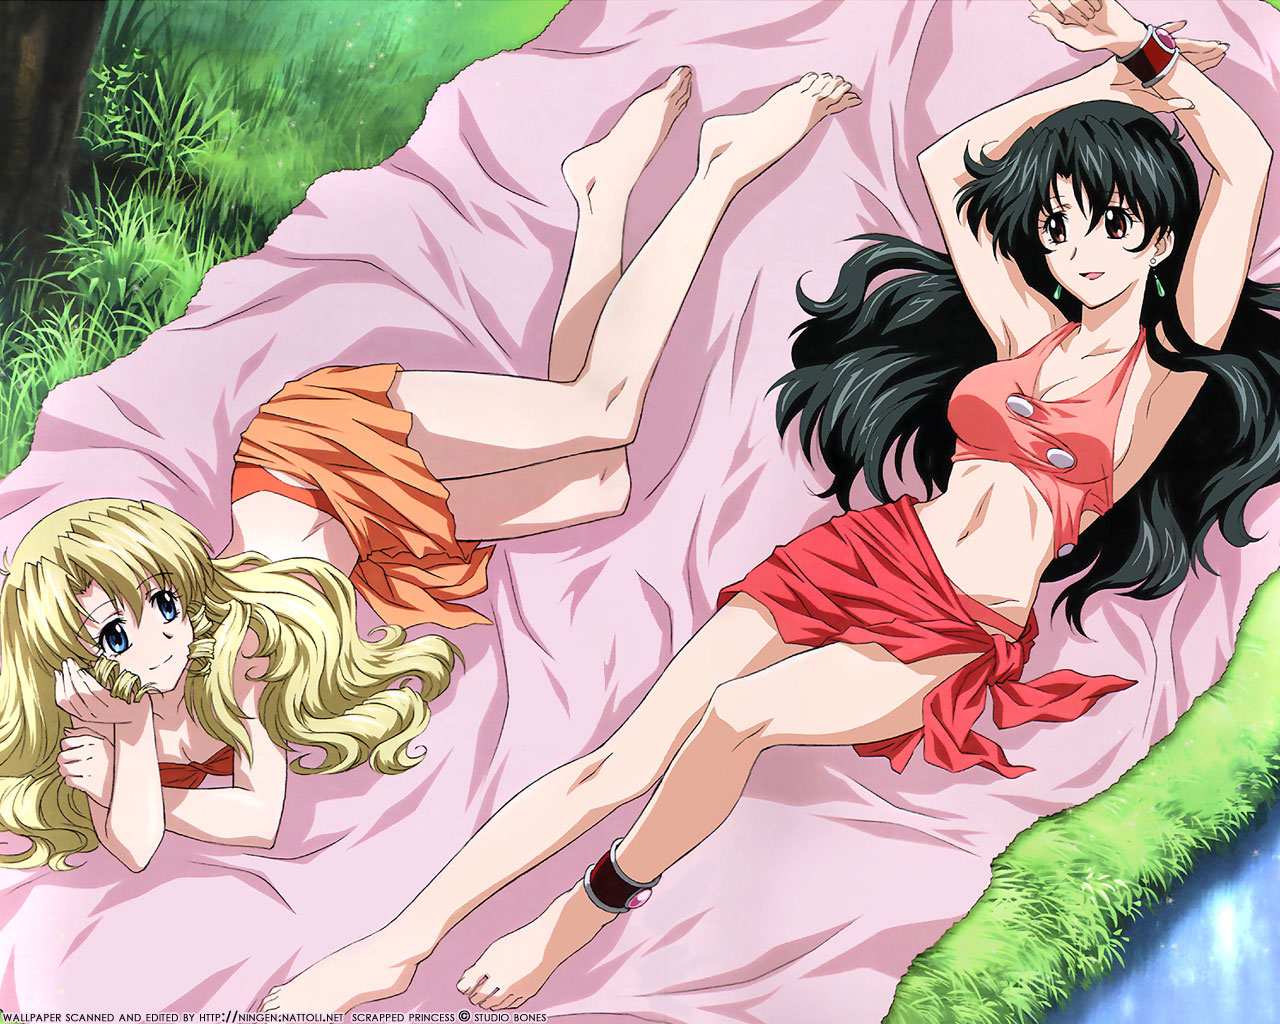 Download High quality Scrapped Princess wallpaper / Anime / 1280x1024